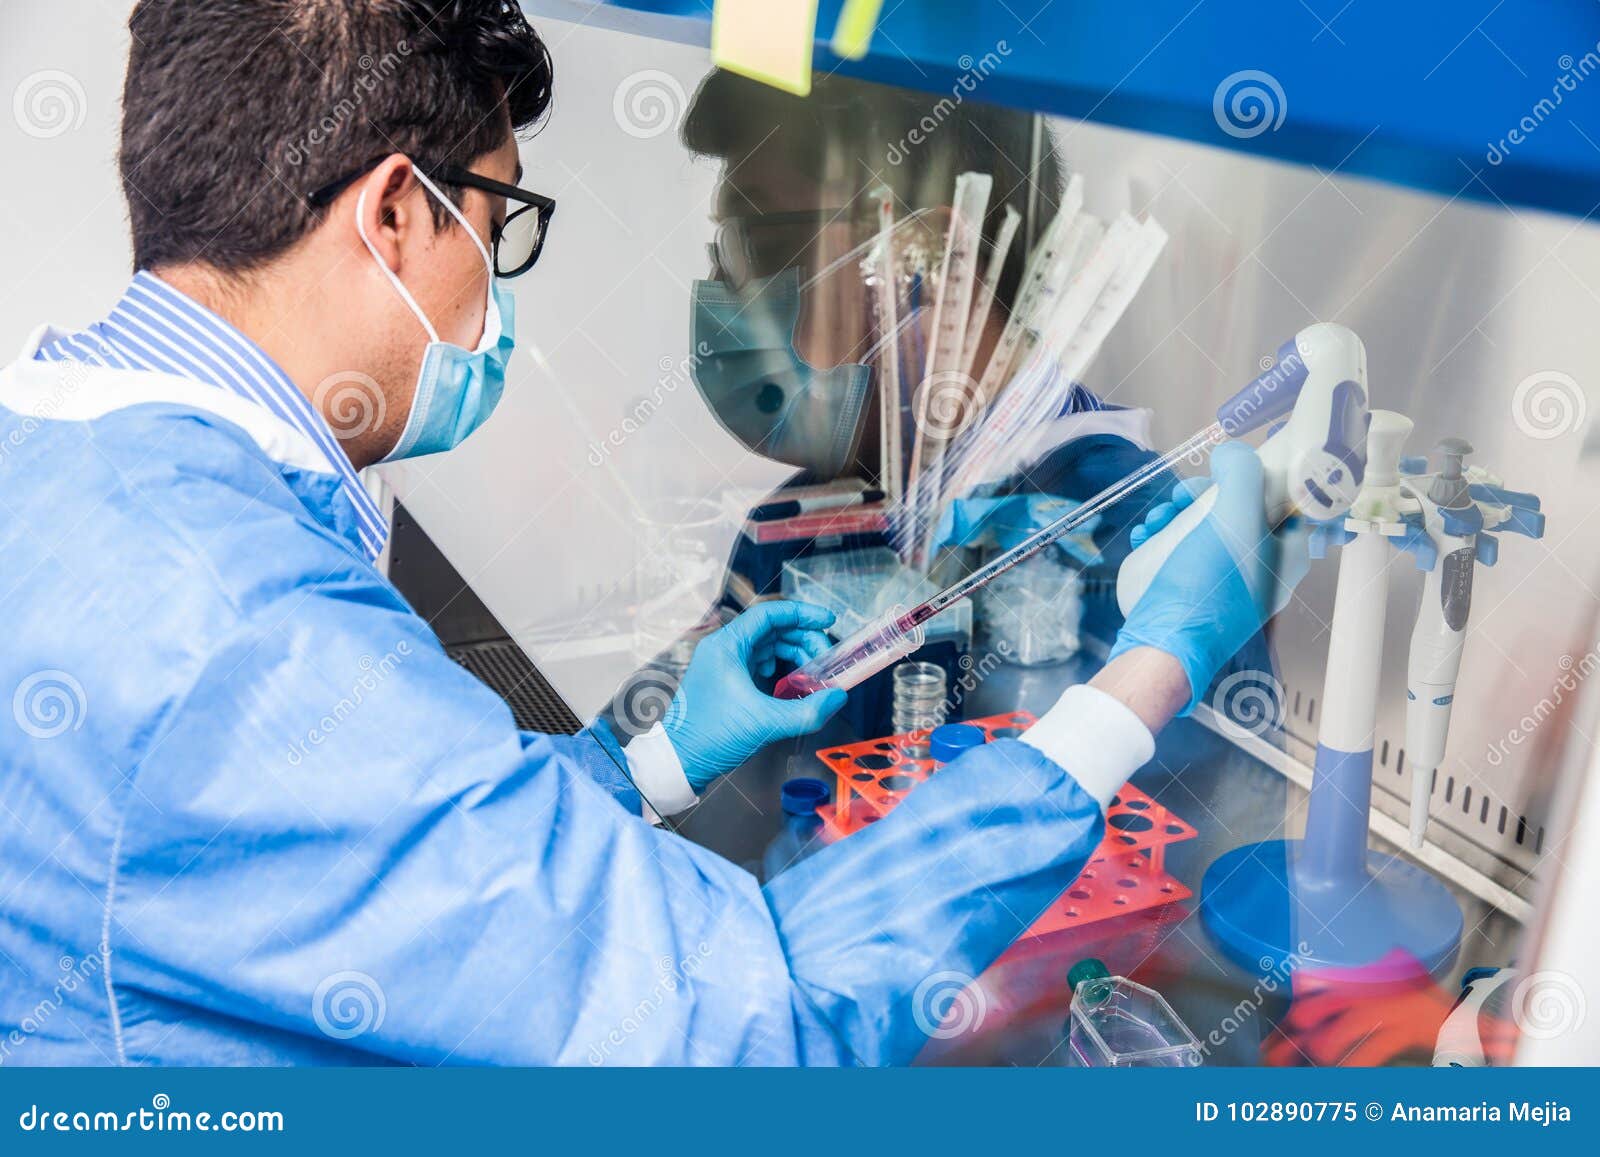 young scientist working in a safety laminar air flow cabinet